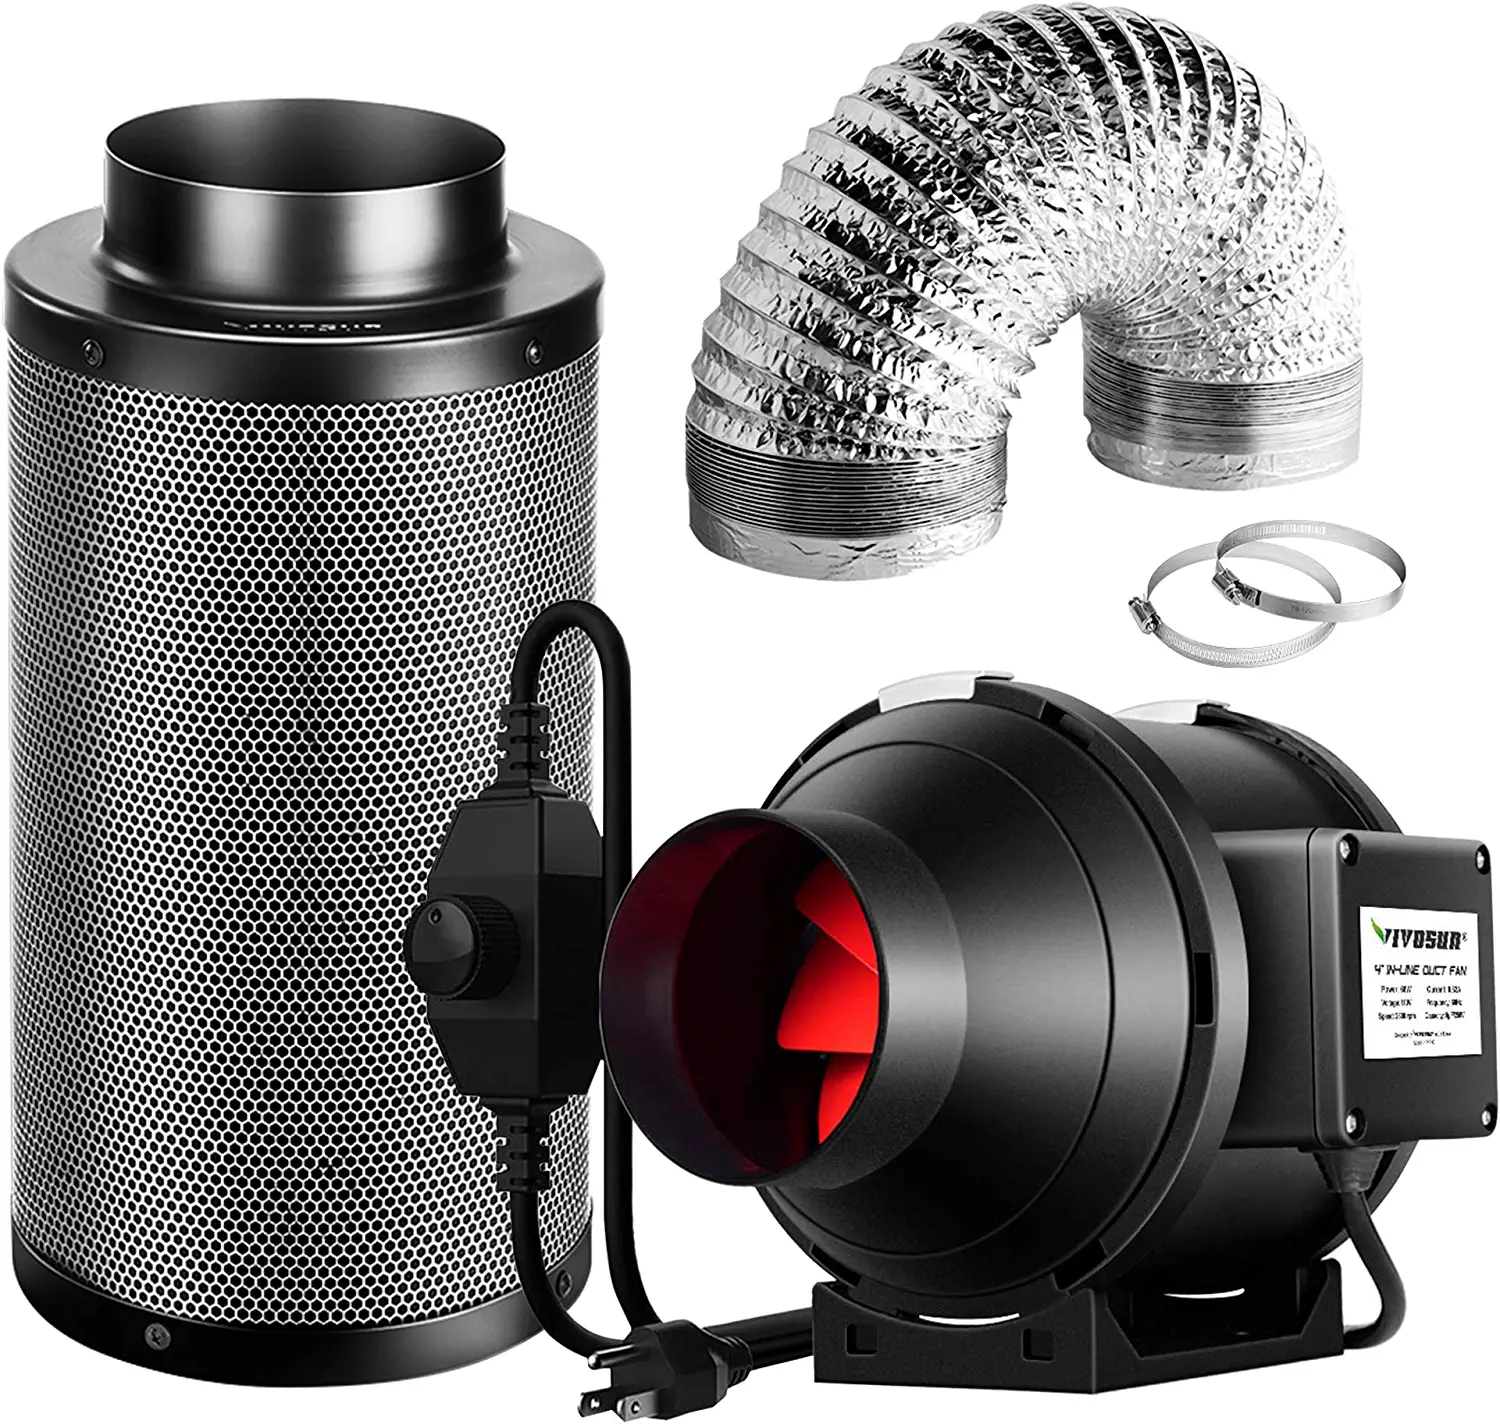 VIVOSUN 4-Inch 190 CFM Inline Duct Fan Kit with Black Carbon Filter and Ducting